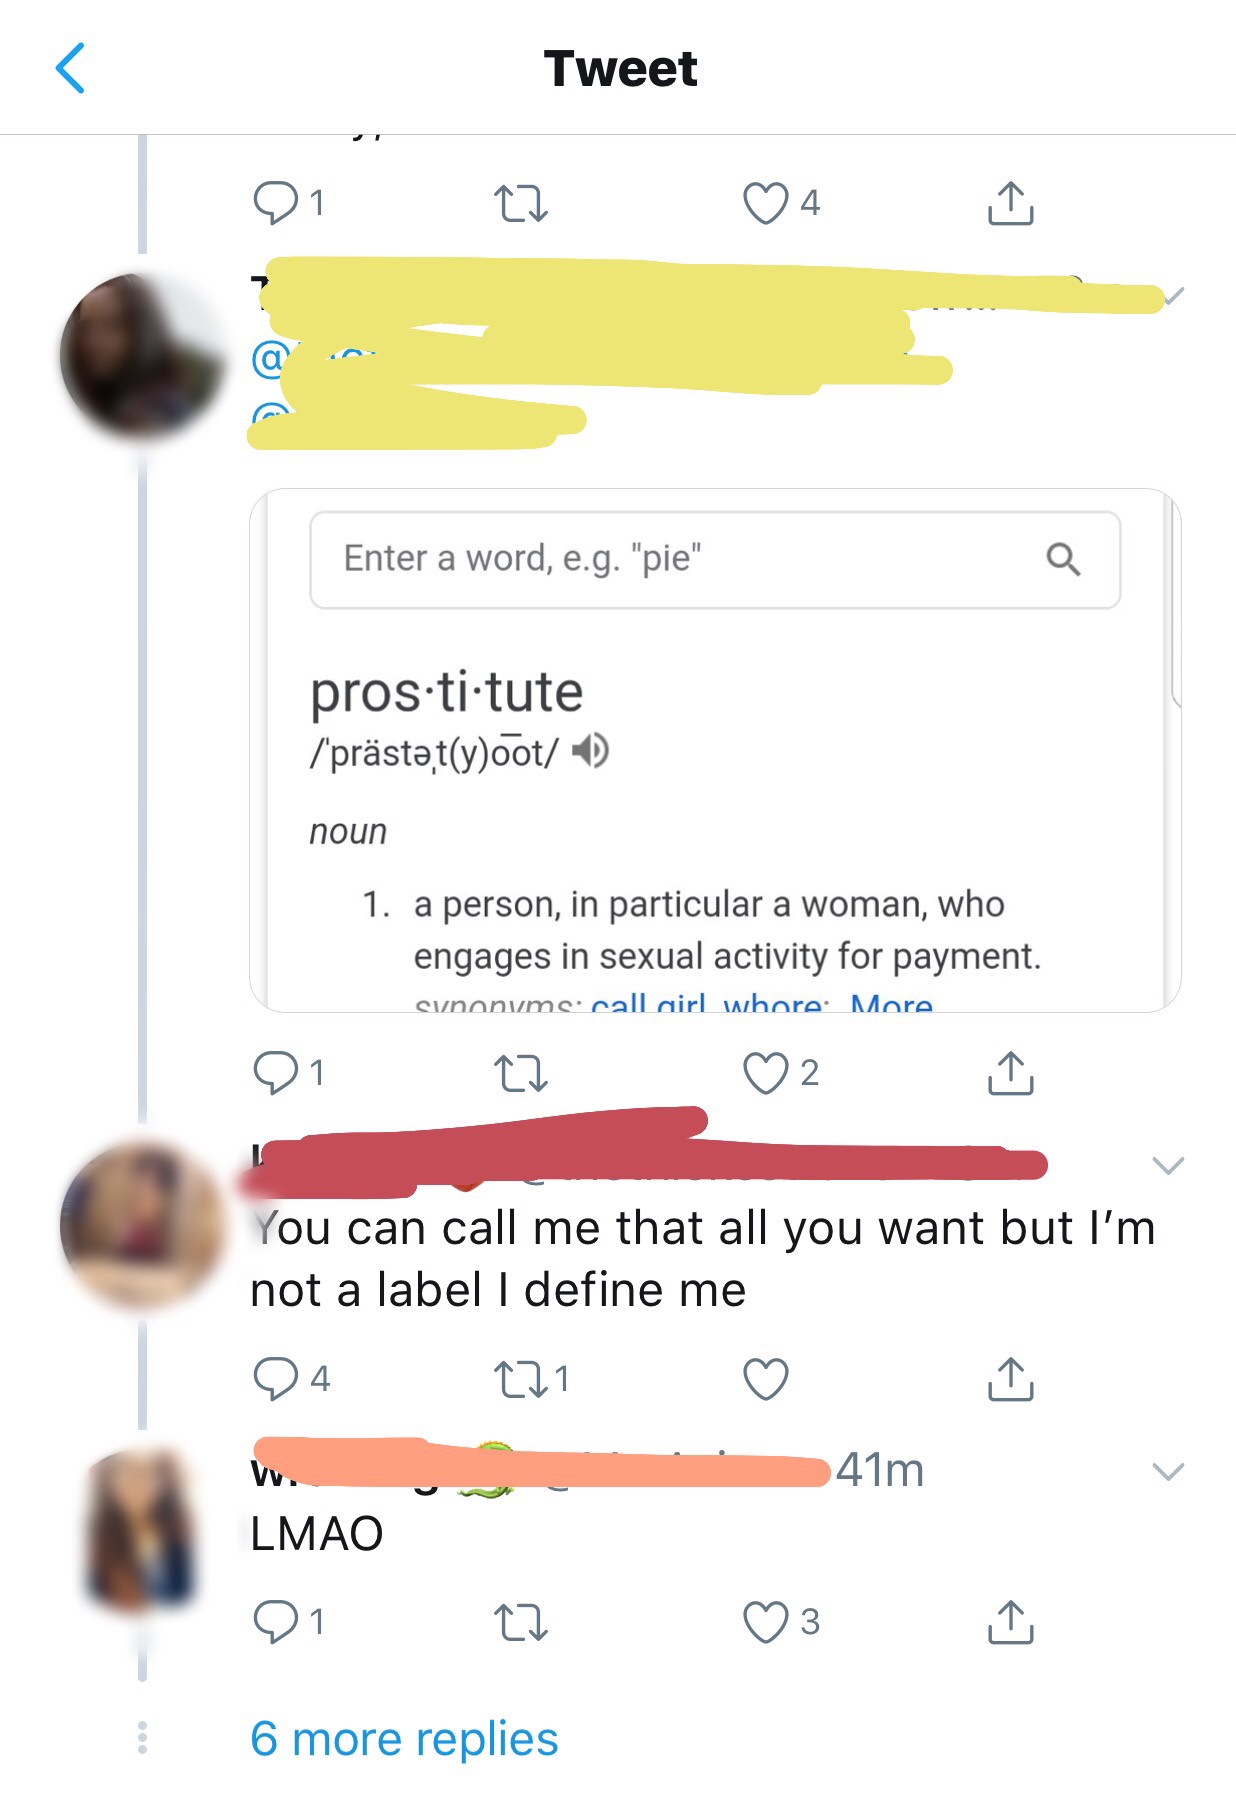 screenshot - Tweet Tweet Enter a word, e.g. "pie" pros.ti.tute 'prsttyoot noun 1. a person, in particular a woman, who engages in sexual activity for payment. cunonume call airl whore More 22 01 27 02 You can call me that all you want but I'm not a label 